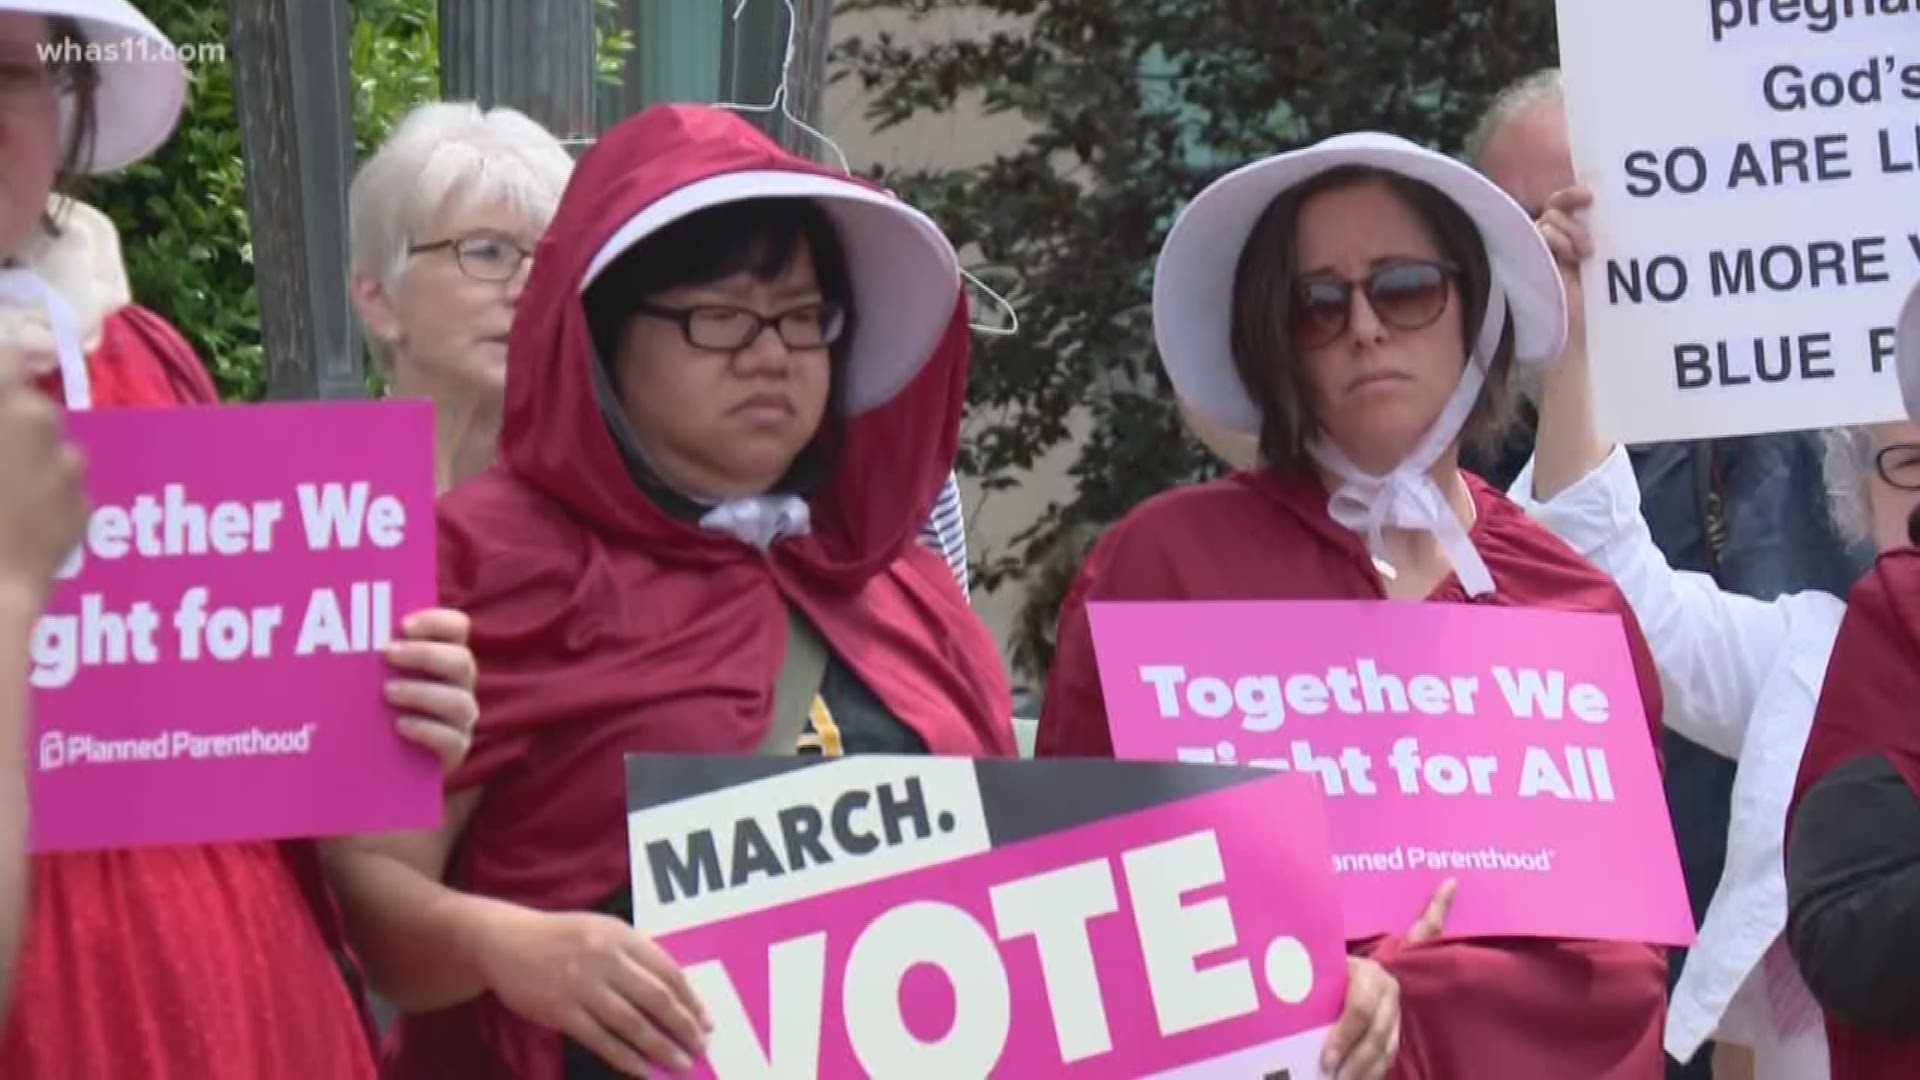 From state capitals to small towns "Stop the Bans" protests erupted across the country on May 21 in response to abortion legislation passed in several states.